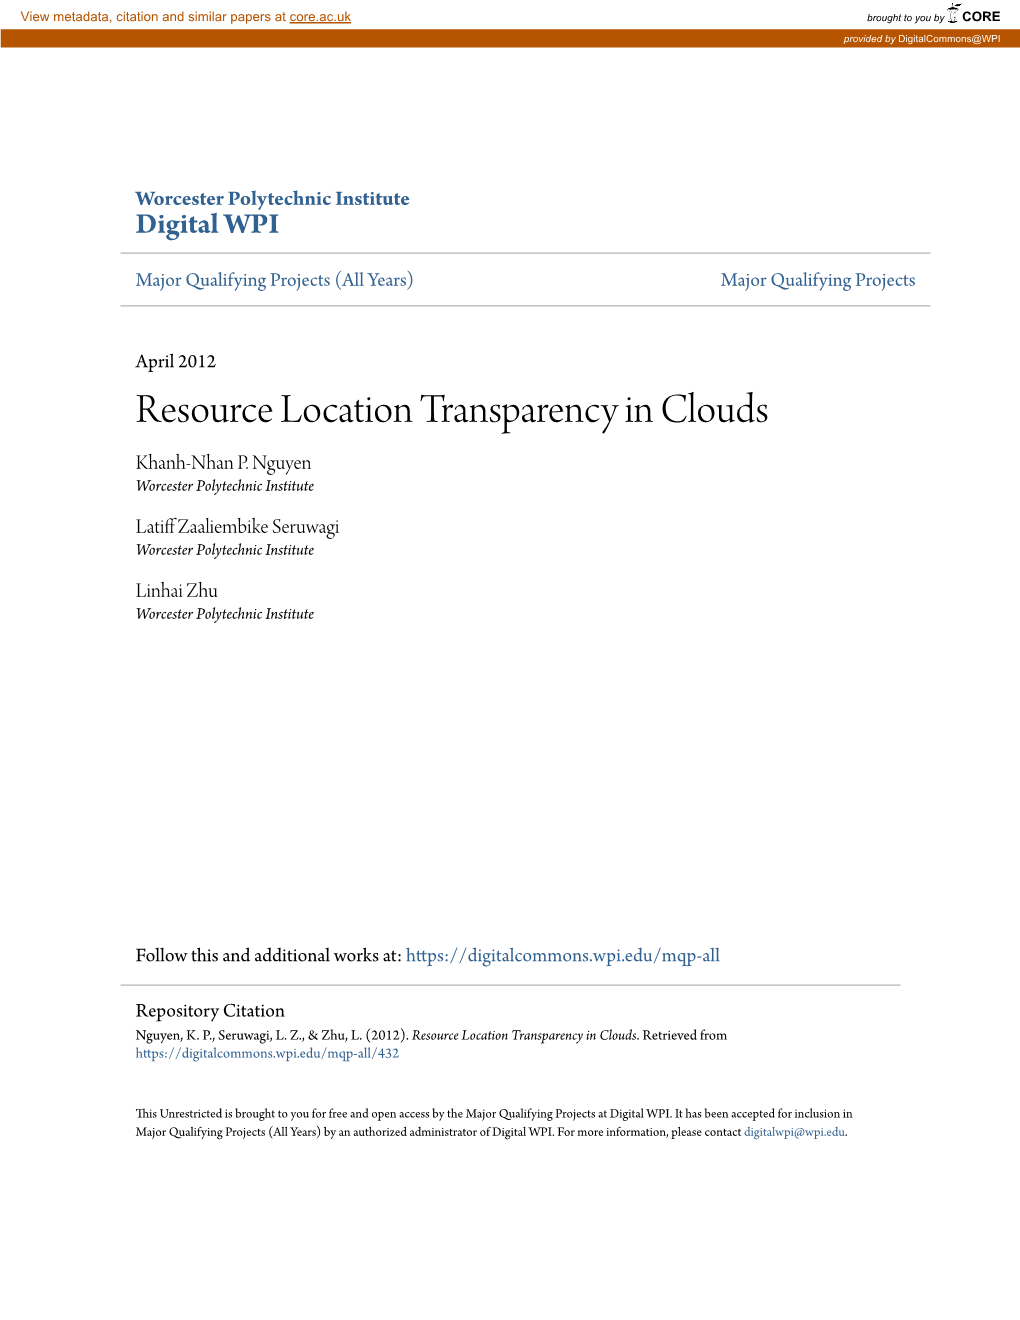 Resource Location Transparency in Clouds Khanh-Nhan P